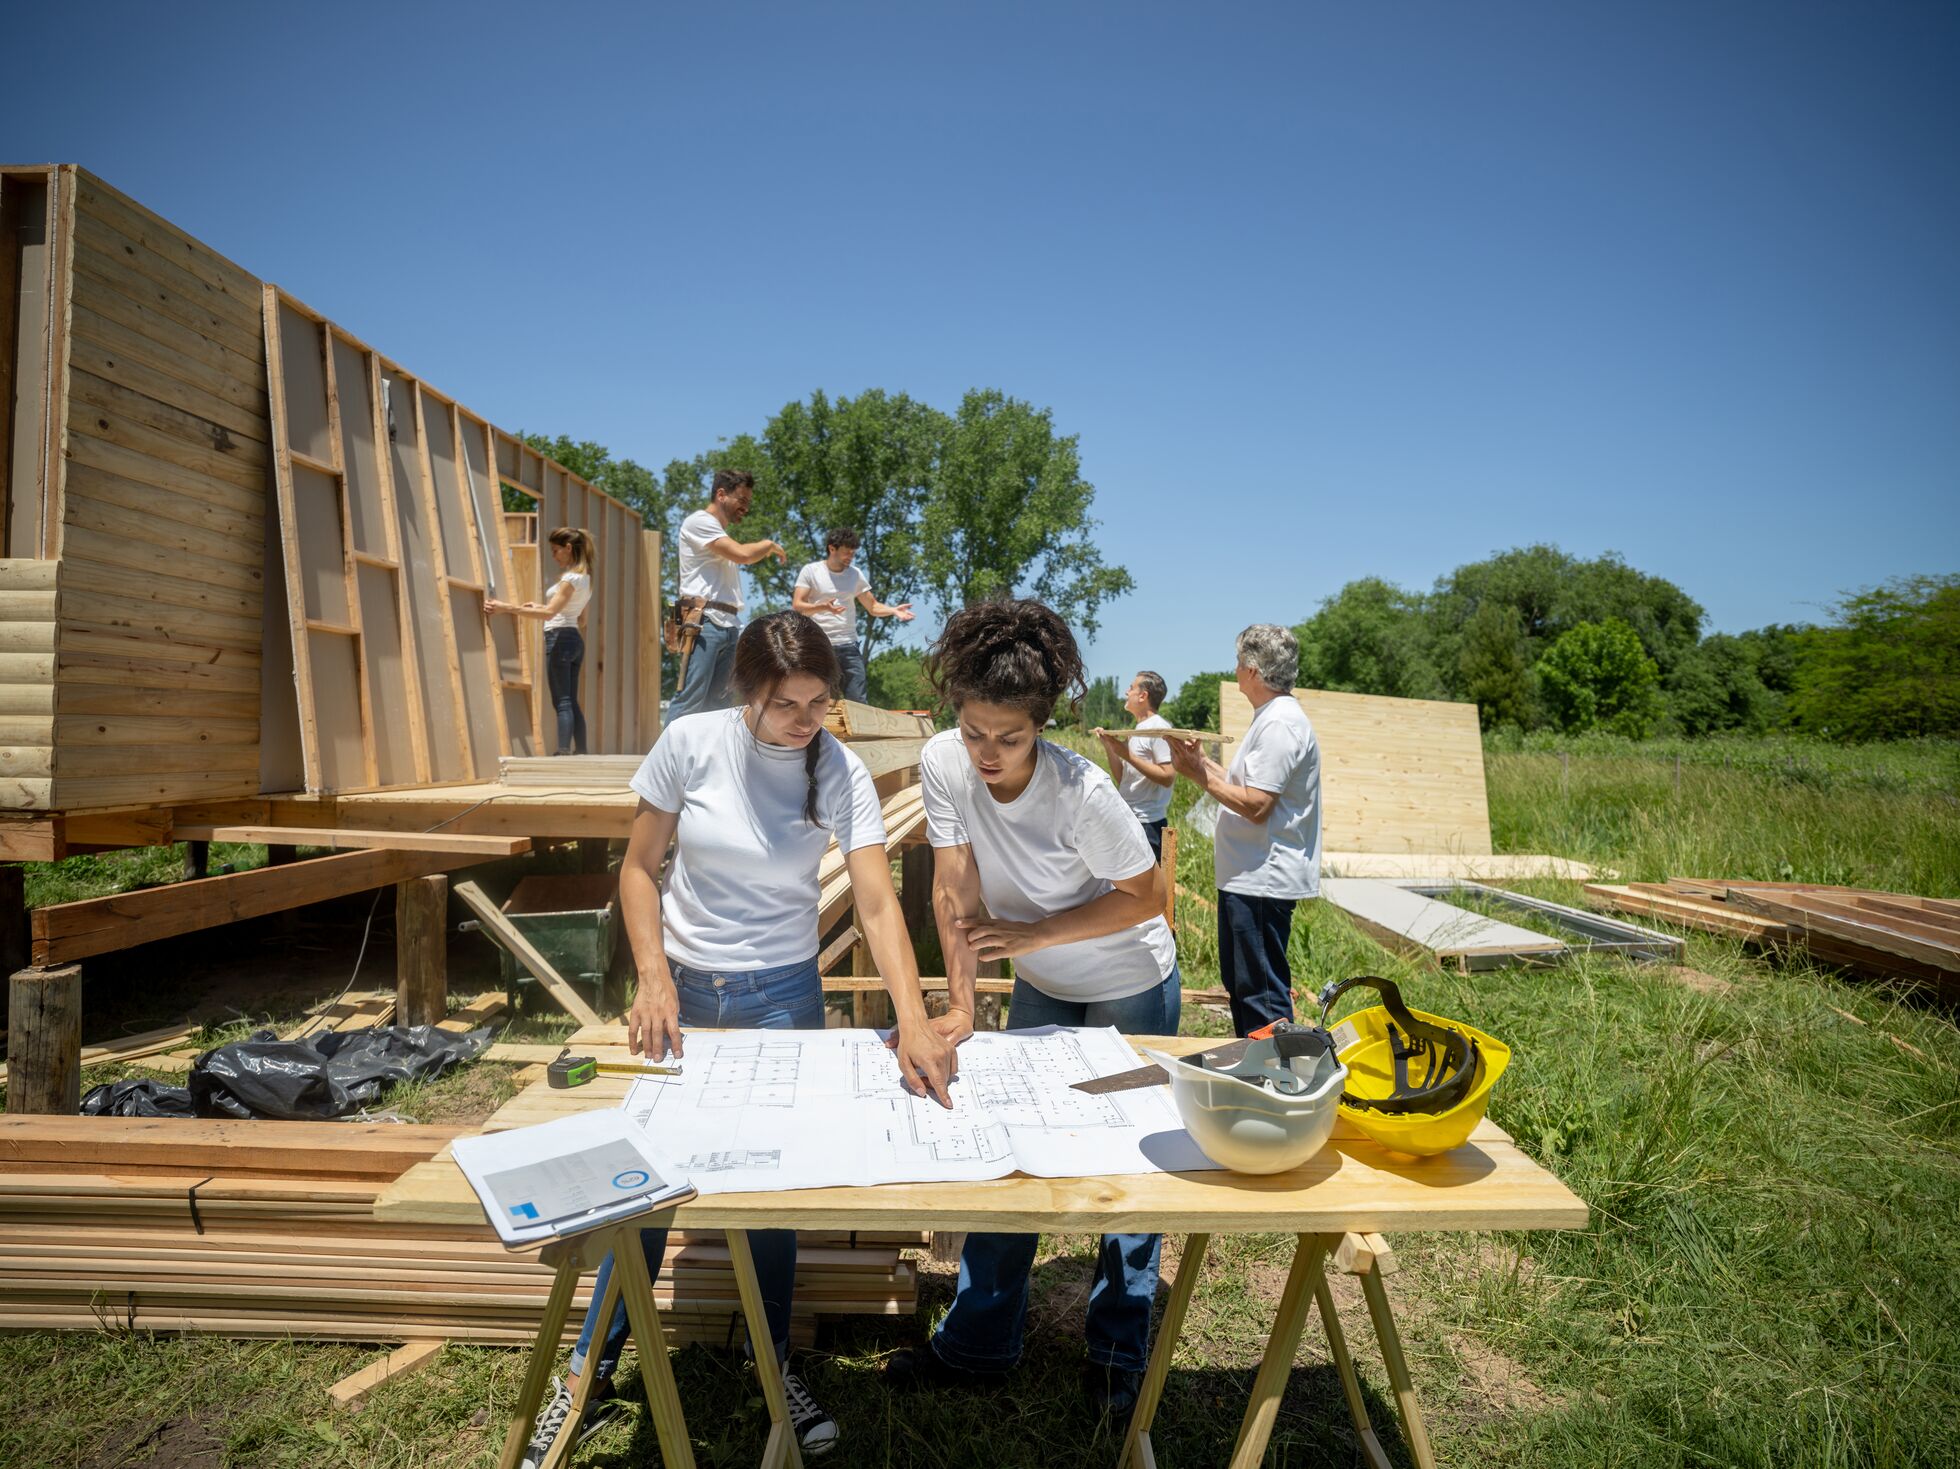 Two people observing plans at a temporary table while people in the background work on a house